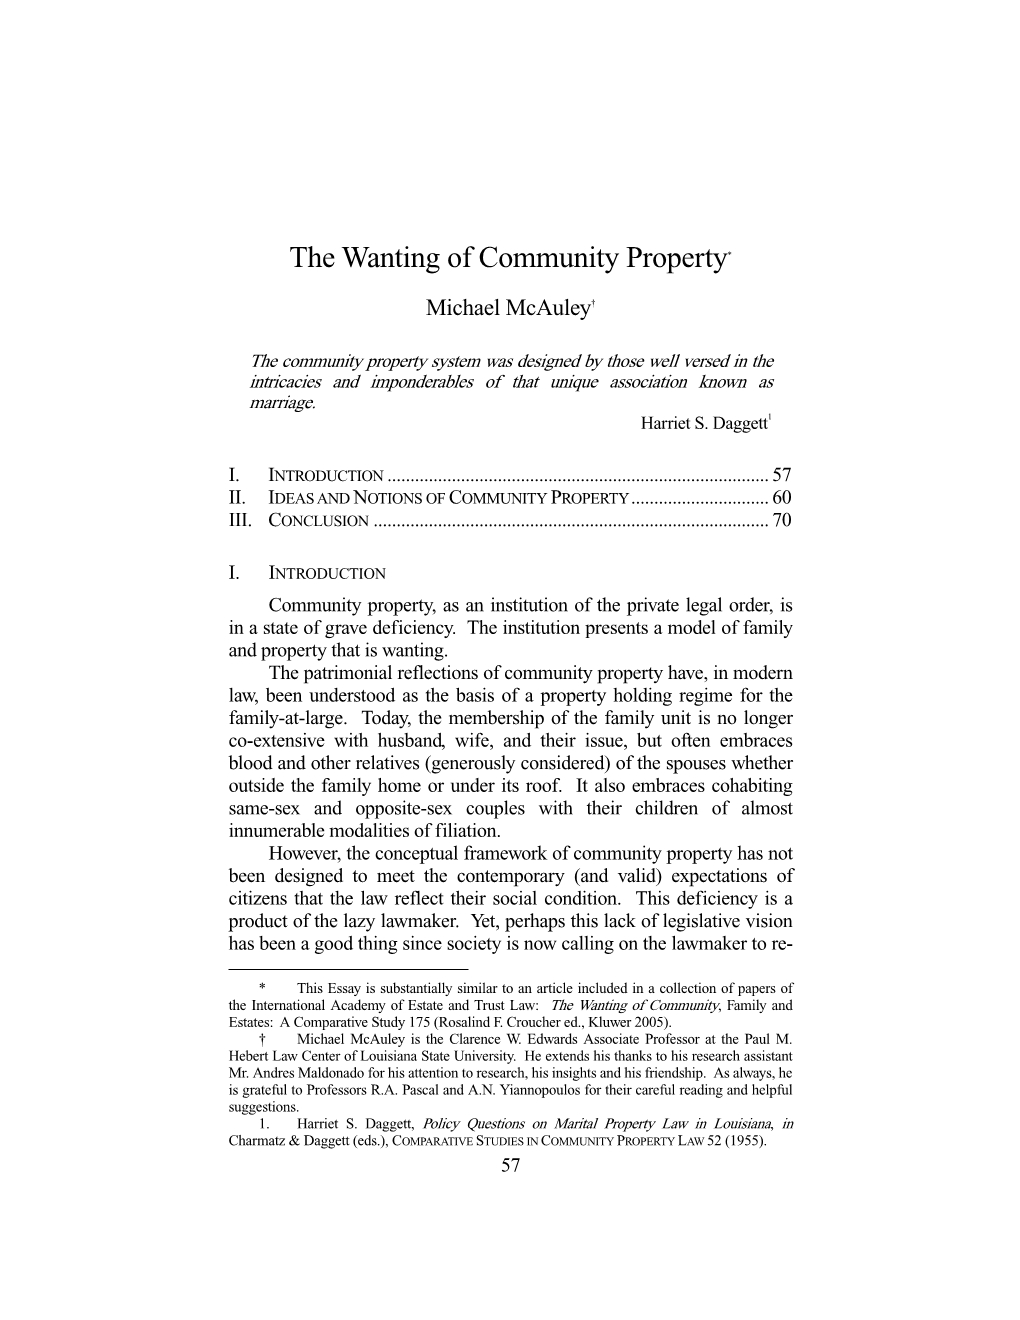 The Wanting of Community Property*